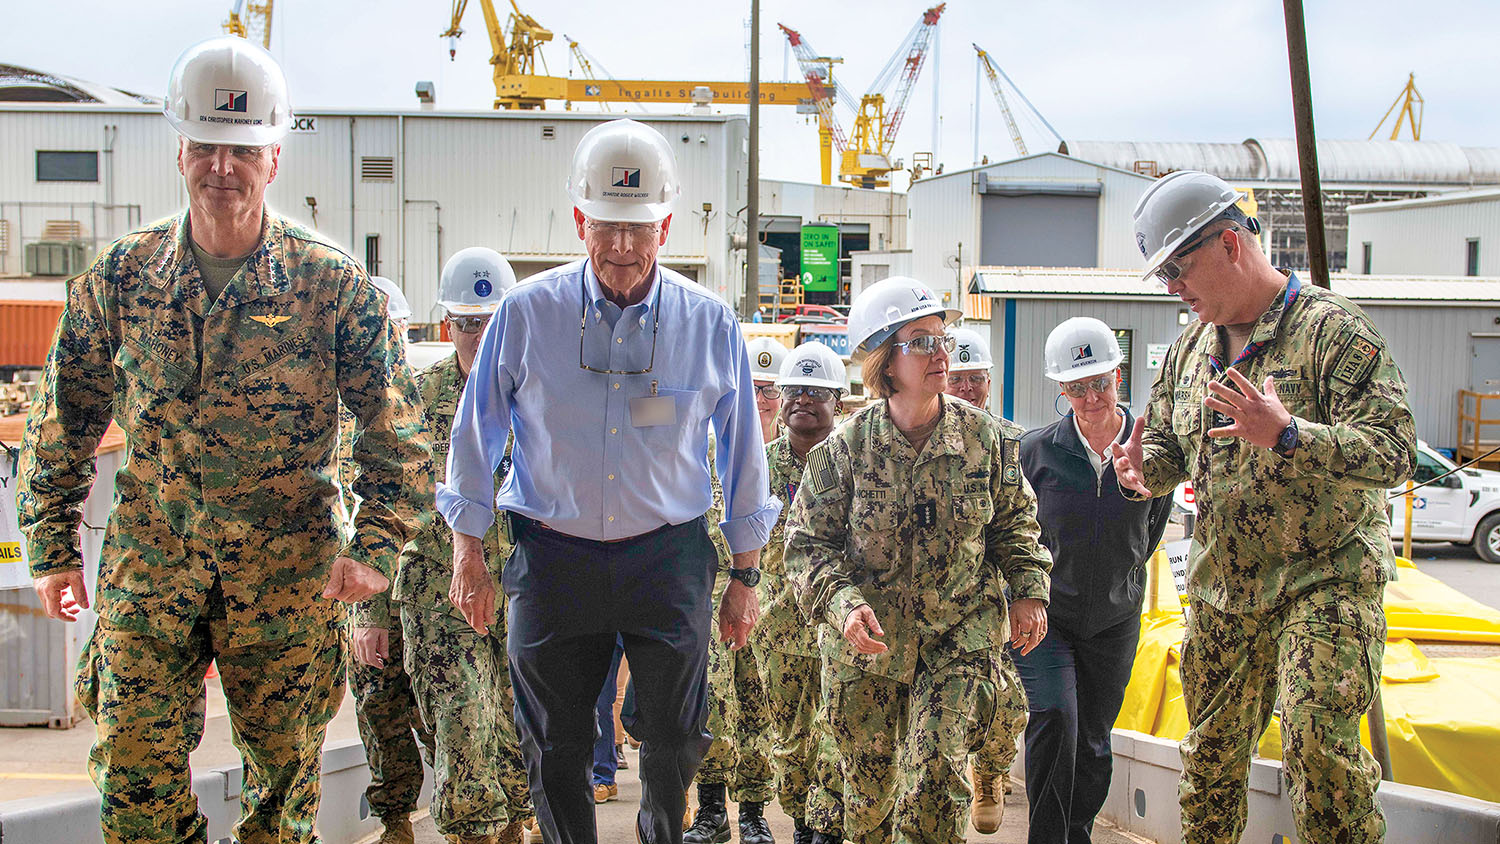 Navy And Marine Brass, Members Of Congress Visit Shipyards